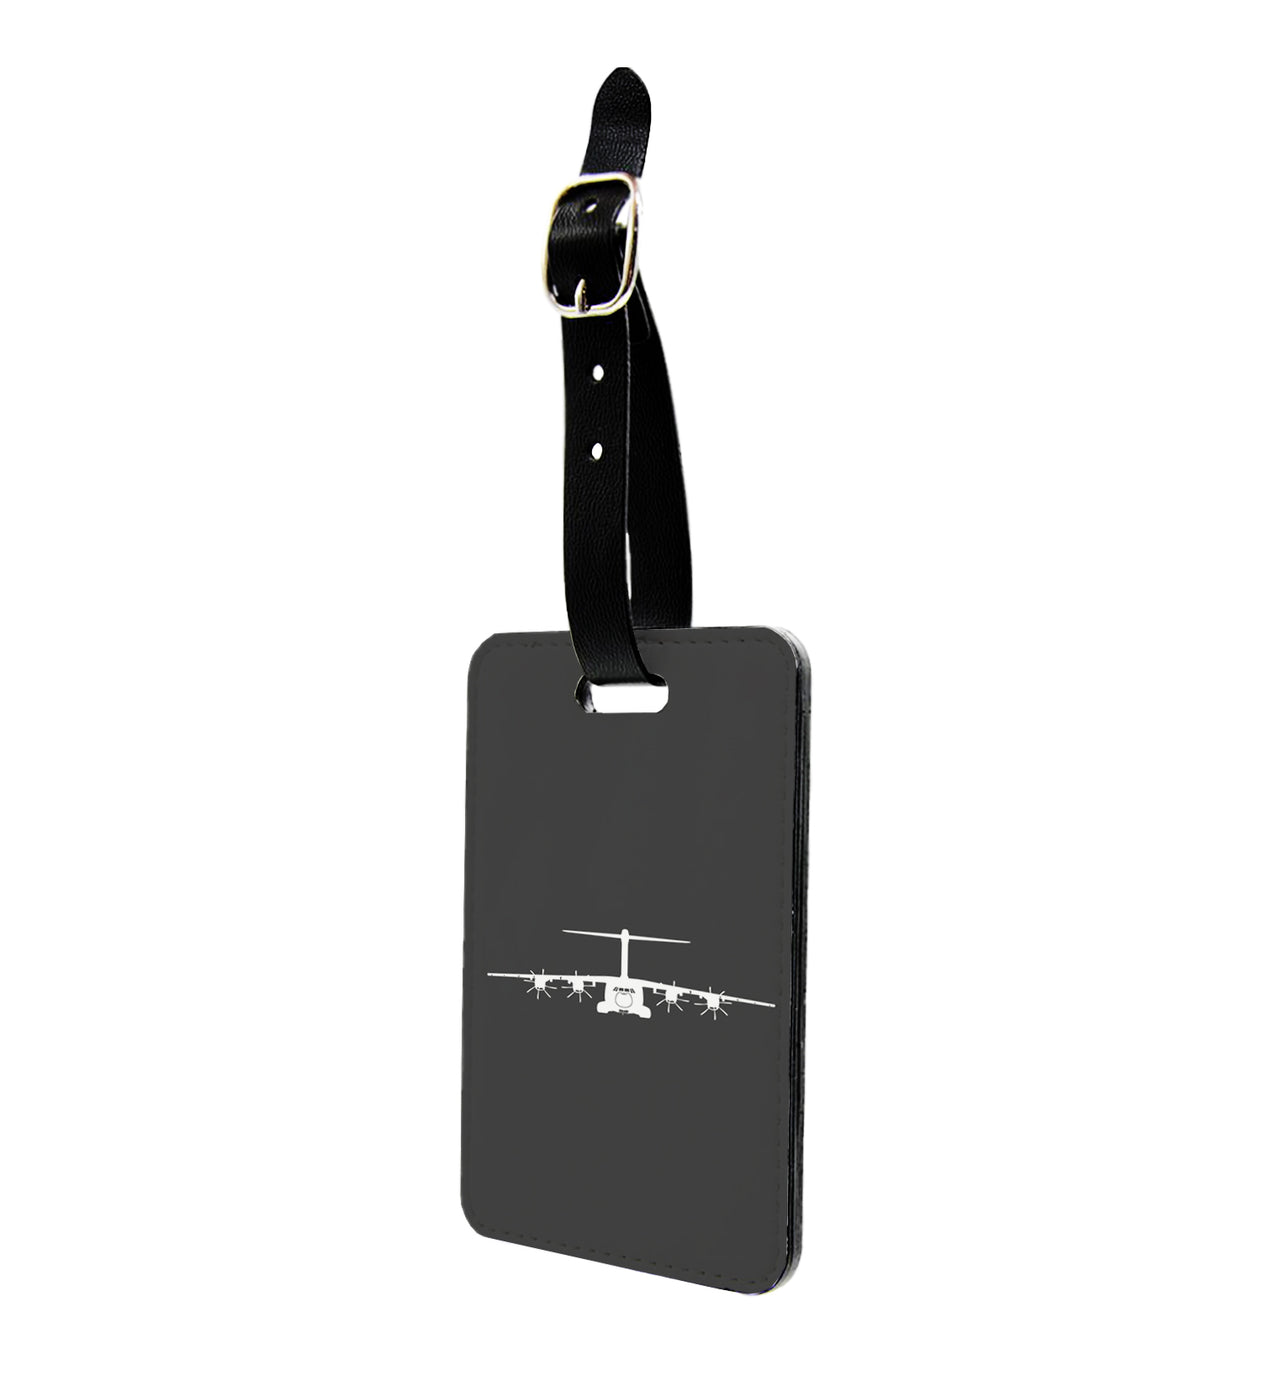 Airbus A400M Silhouette Designed Luggage Tag